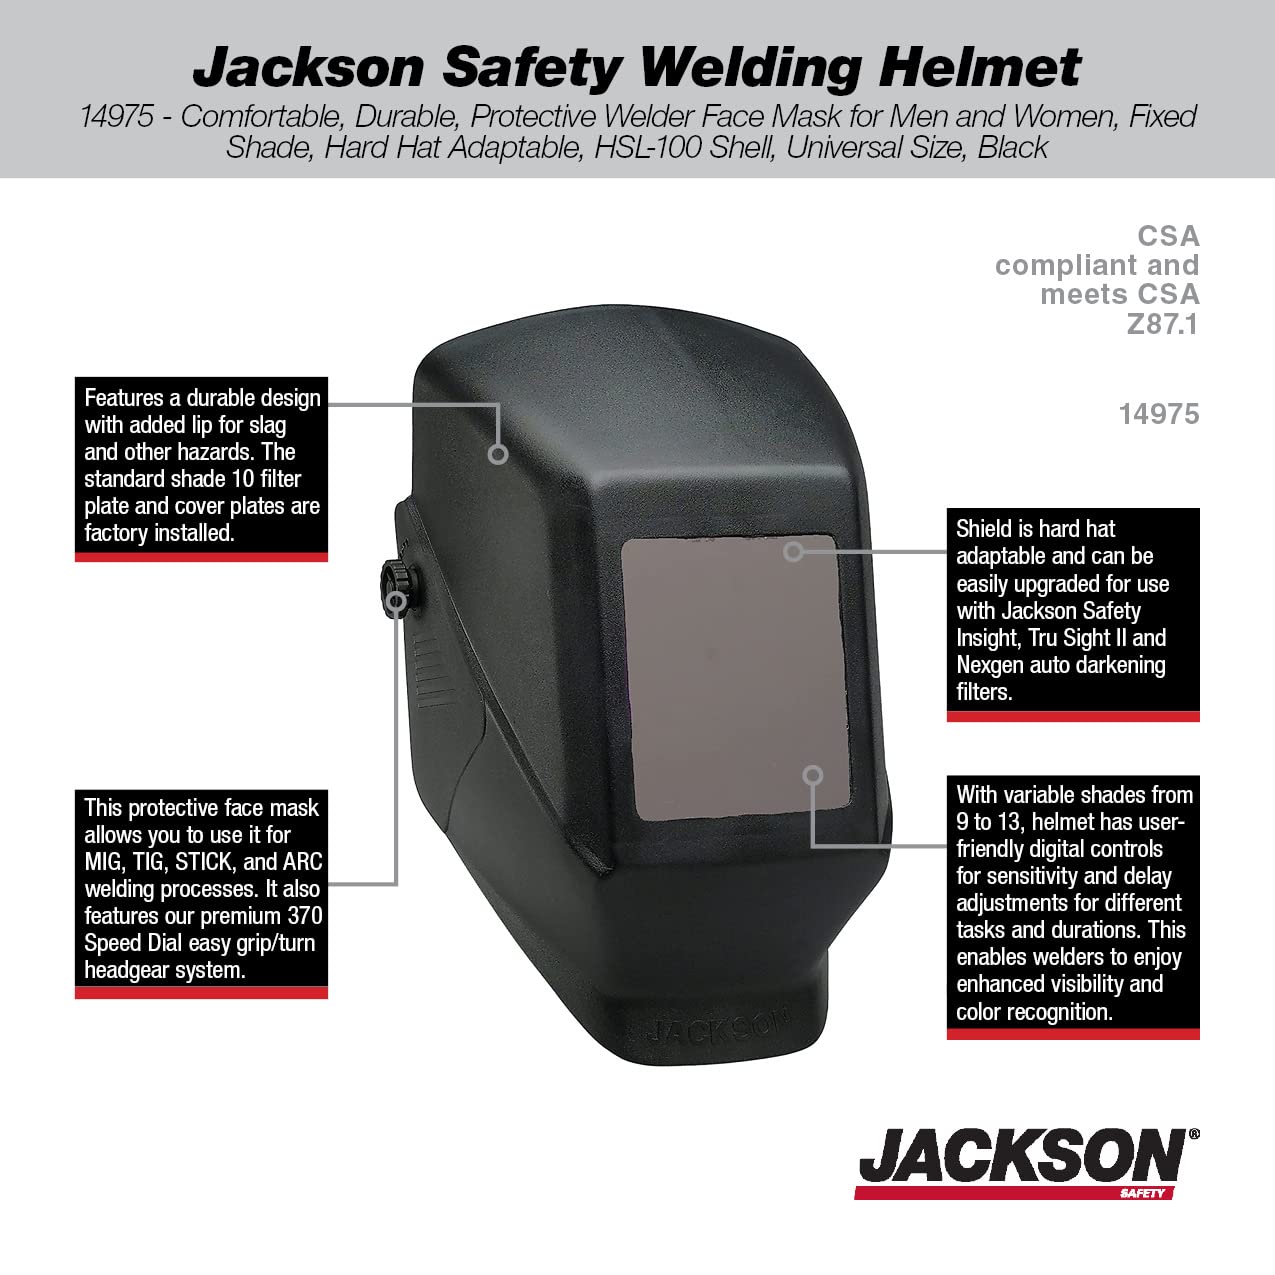 Jackson Safety Welding Helmet, Auto Darkening Hood, Durable Protective Welder Face Mask for Men and Women, Fixed Shade, Hard Hat Adaptable, HSL-100 Shell, Universal Size, Black, 14975